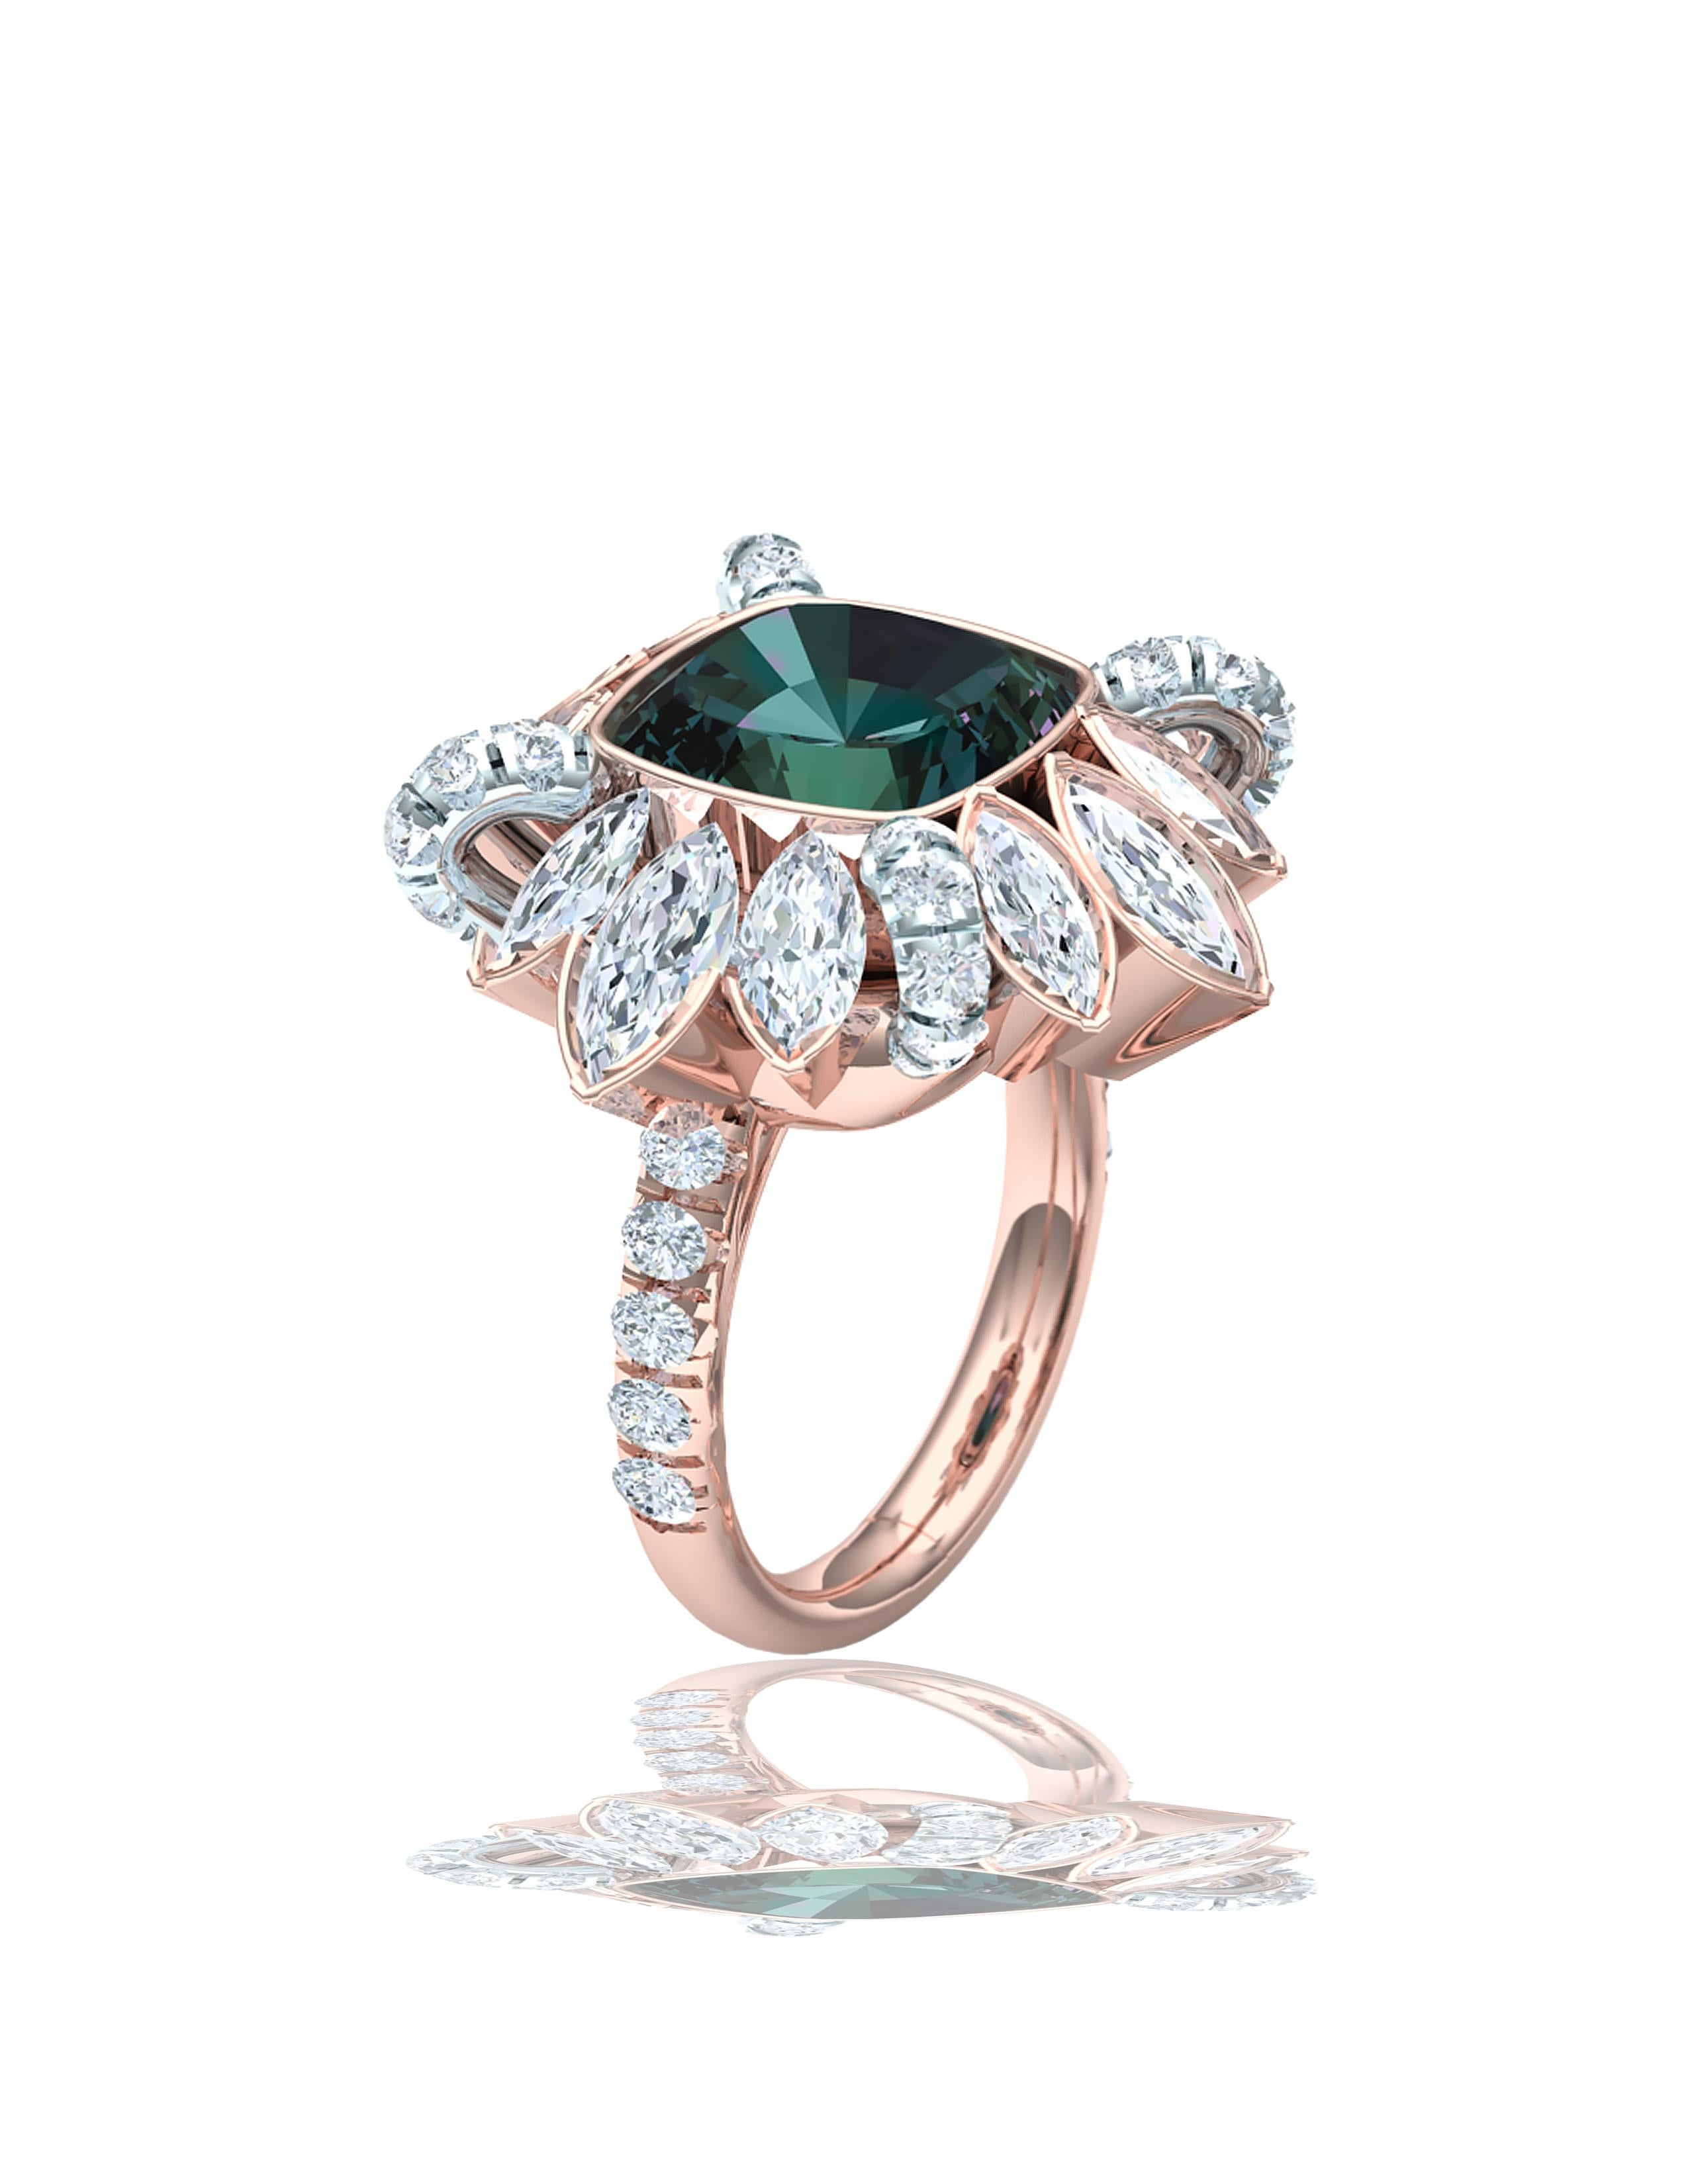 Modern 3 Carat Teal Green Sapphire and Diamond Cocktail Ring For Sale